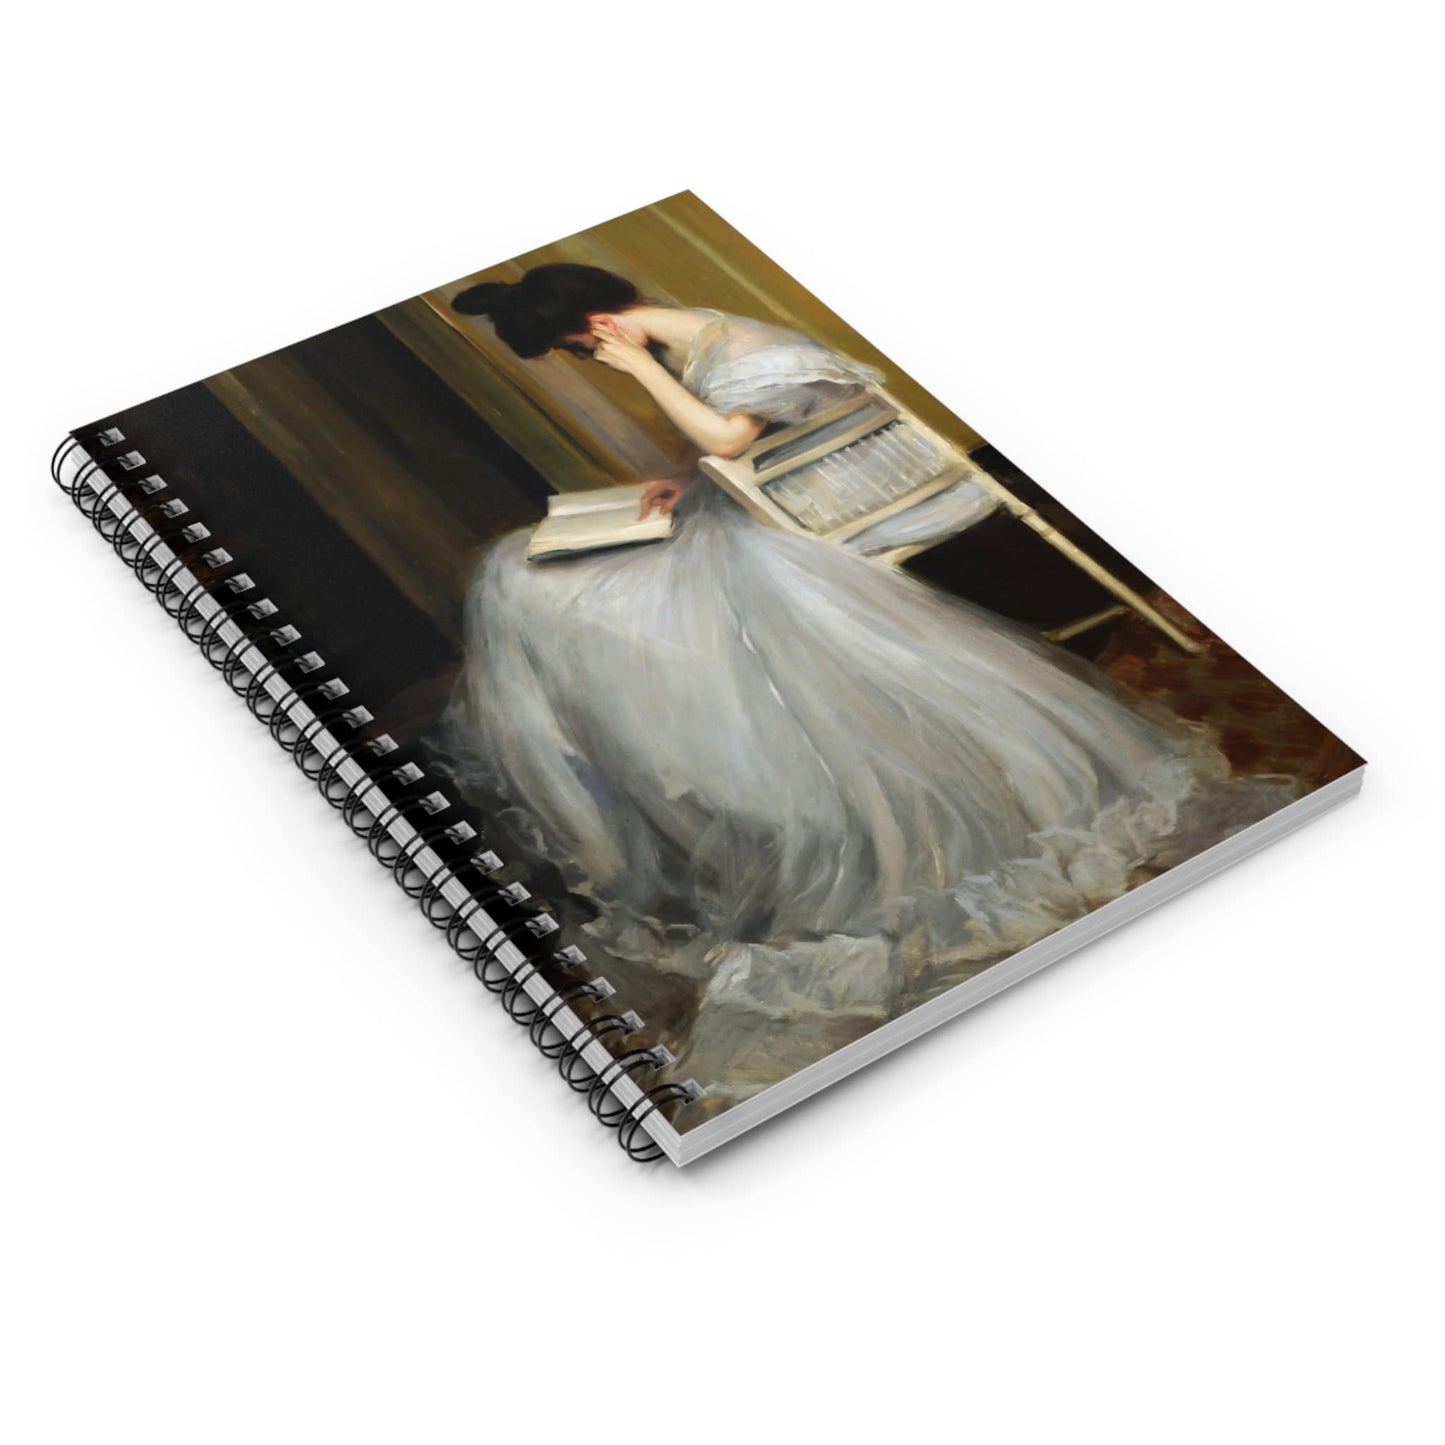 Woman Reading Spiral Notebook Laying Flat on White Surface